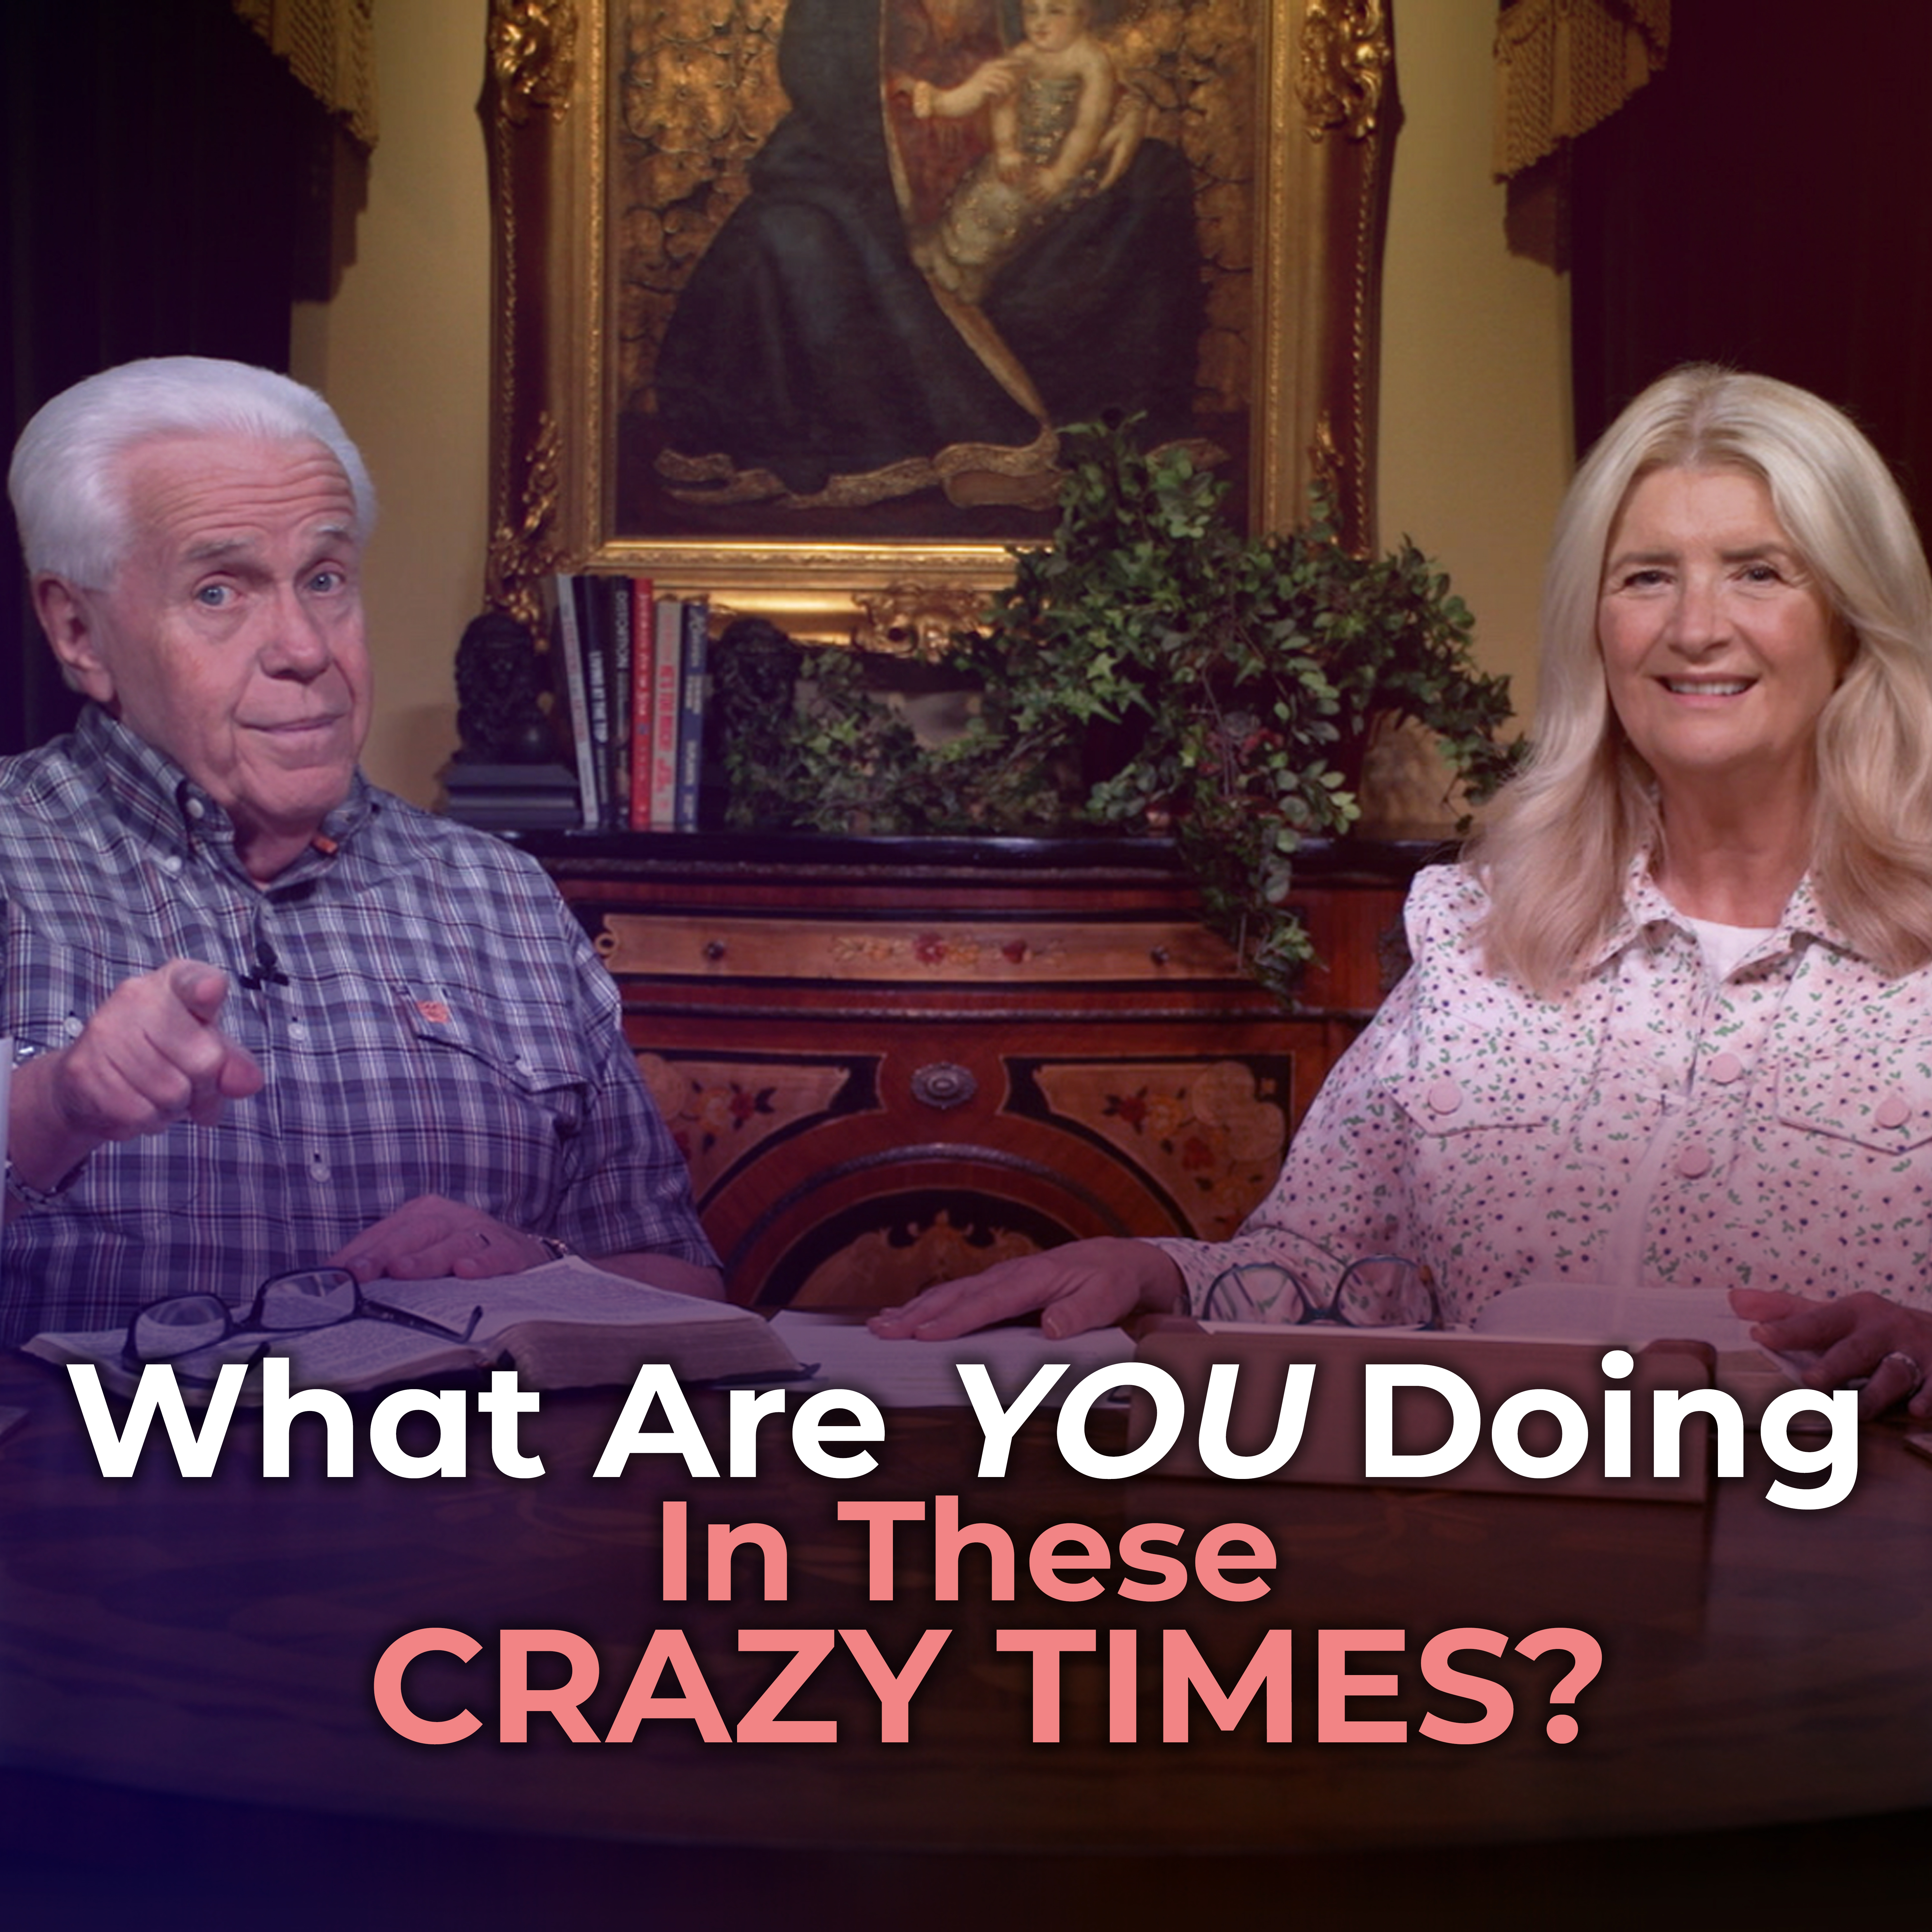 What Are You Doing In These Crazy Times?